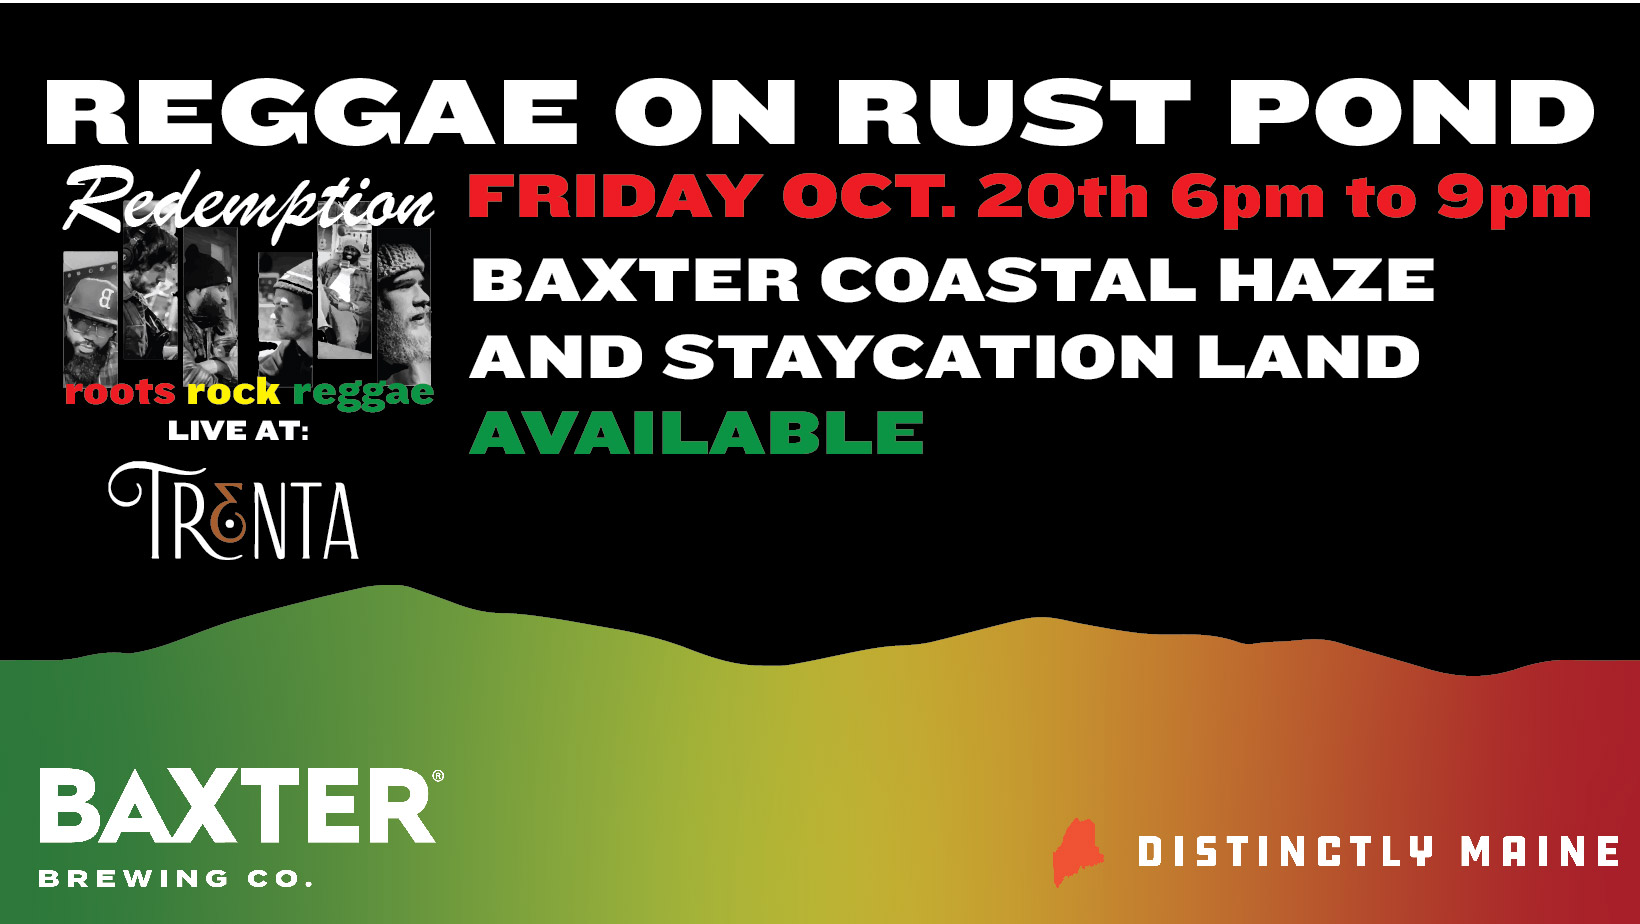 image promoting an event on October 20th Reggae on Rust Pond